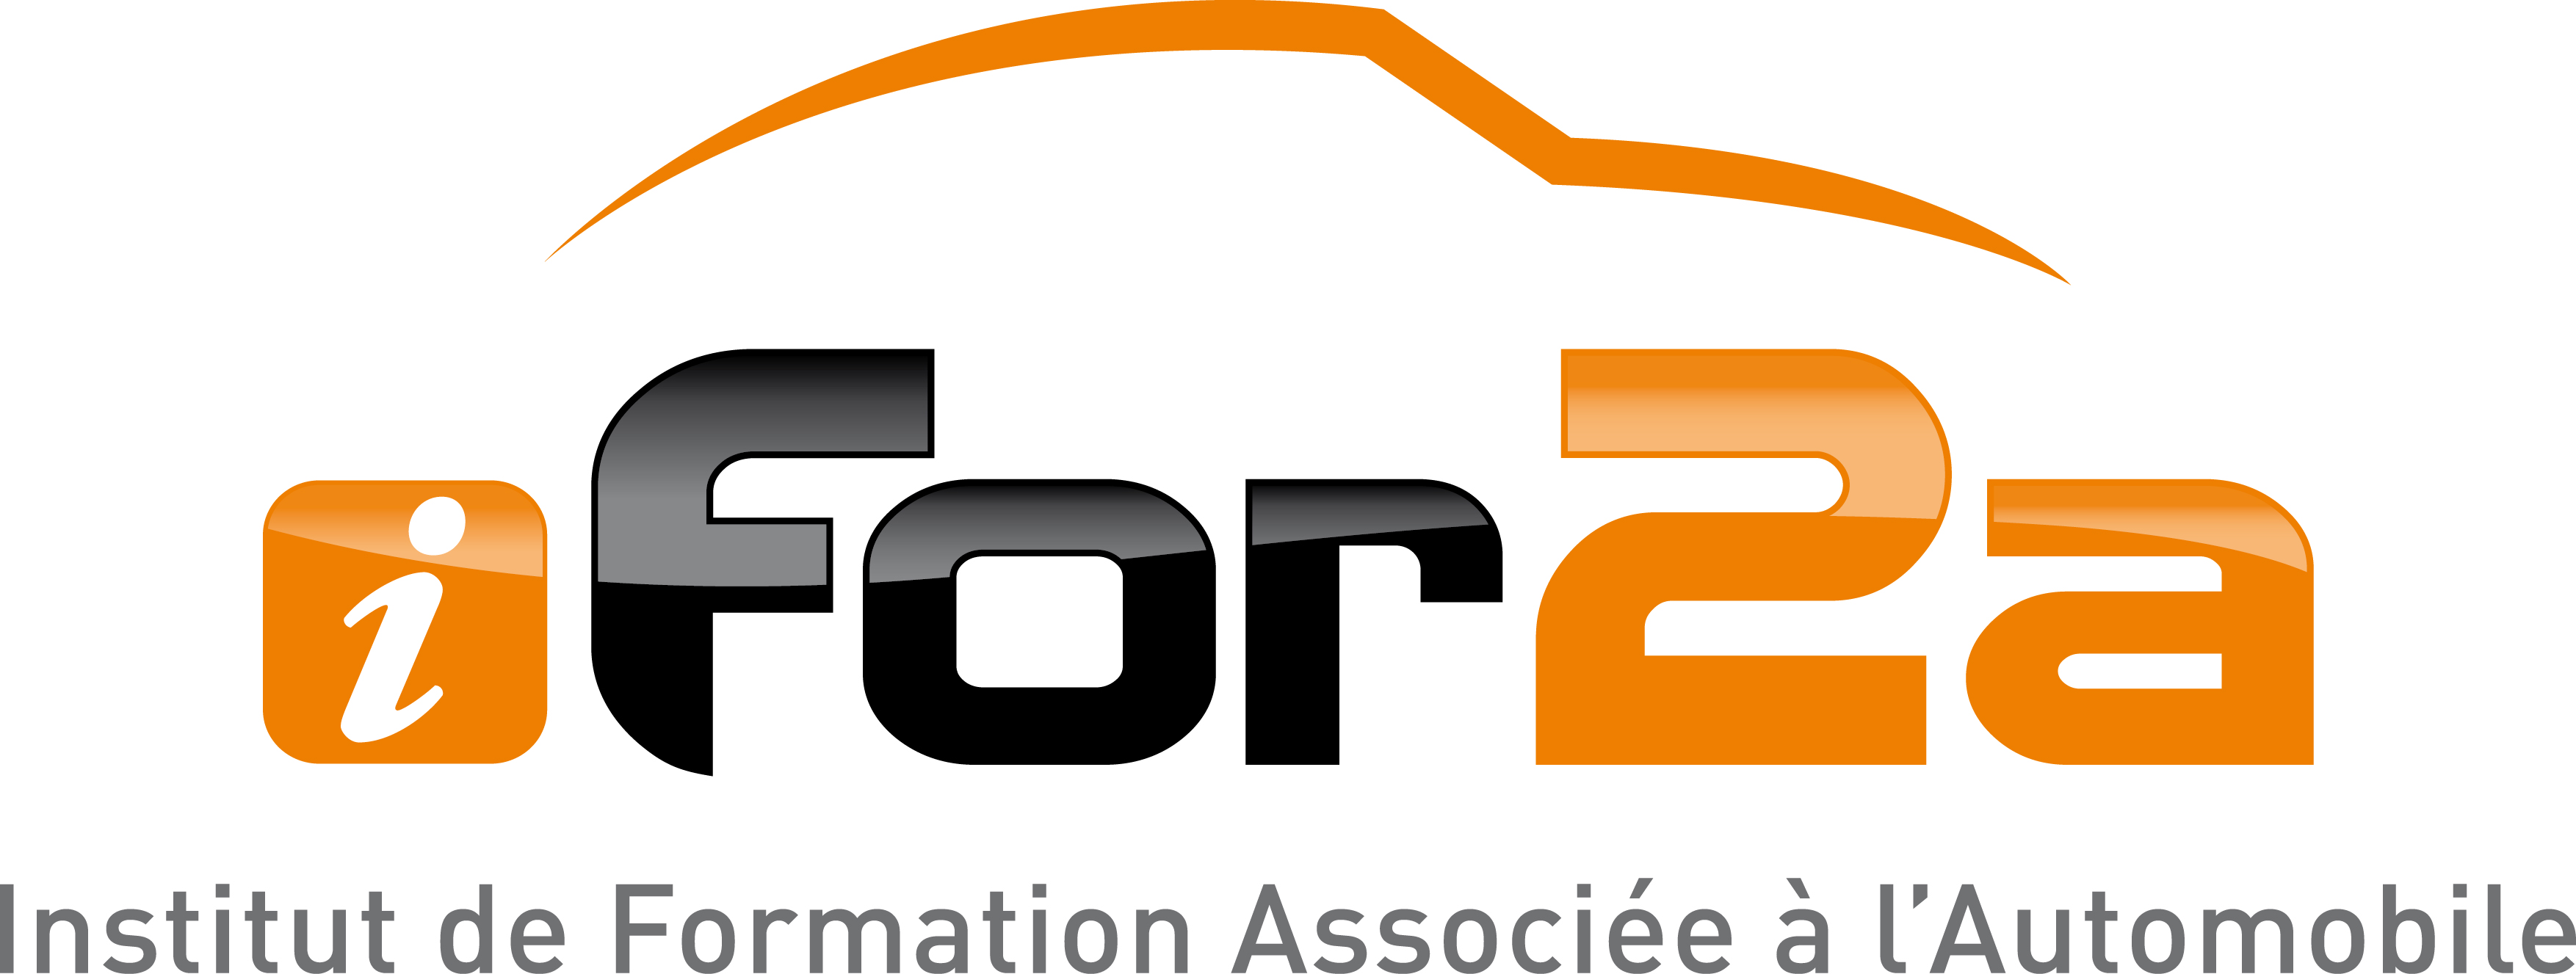 logo IFOR2A